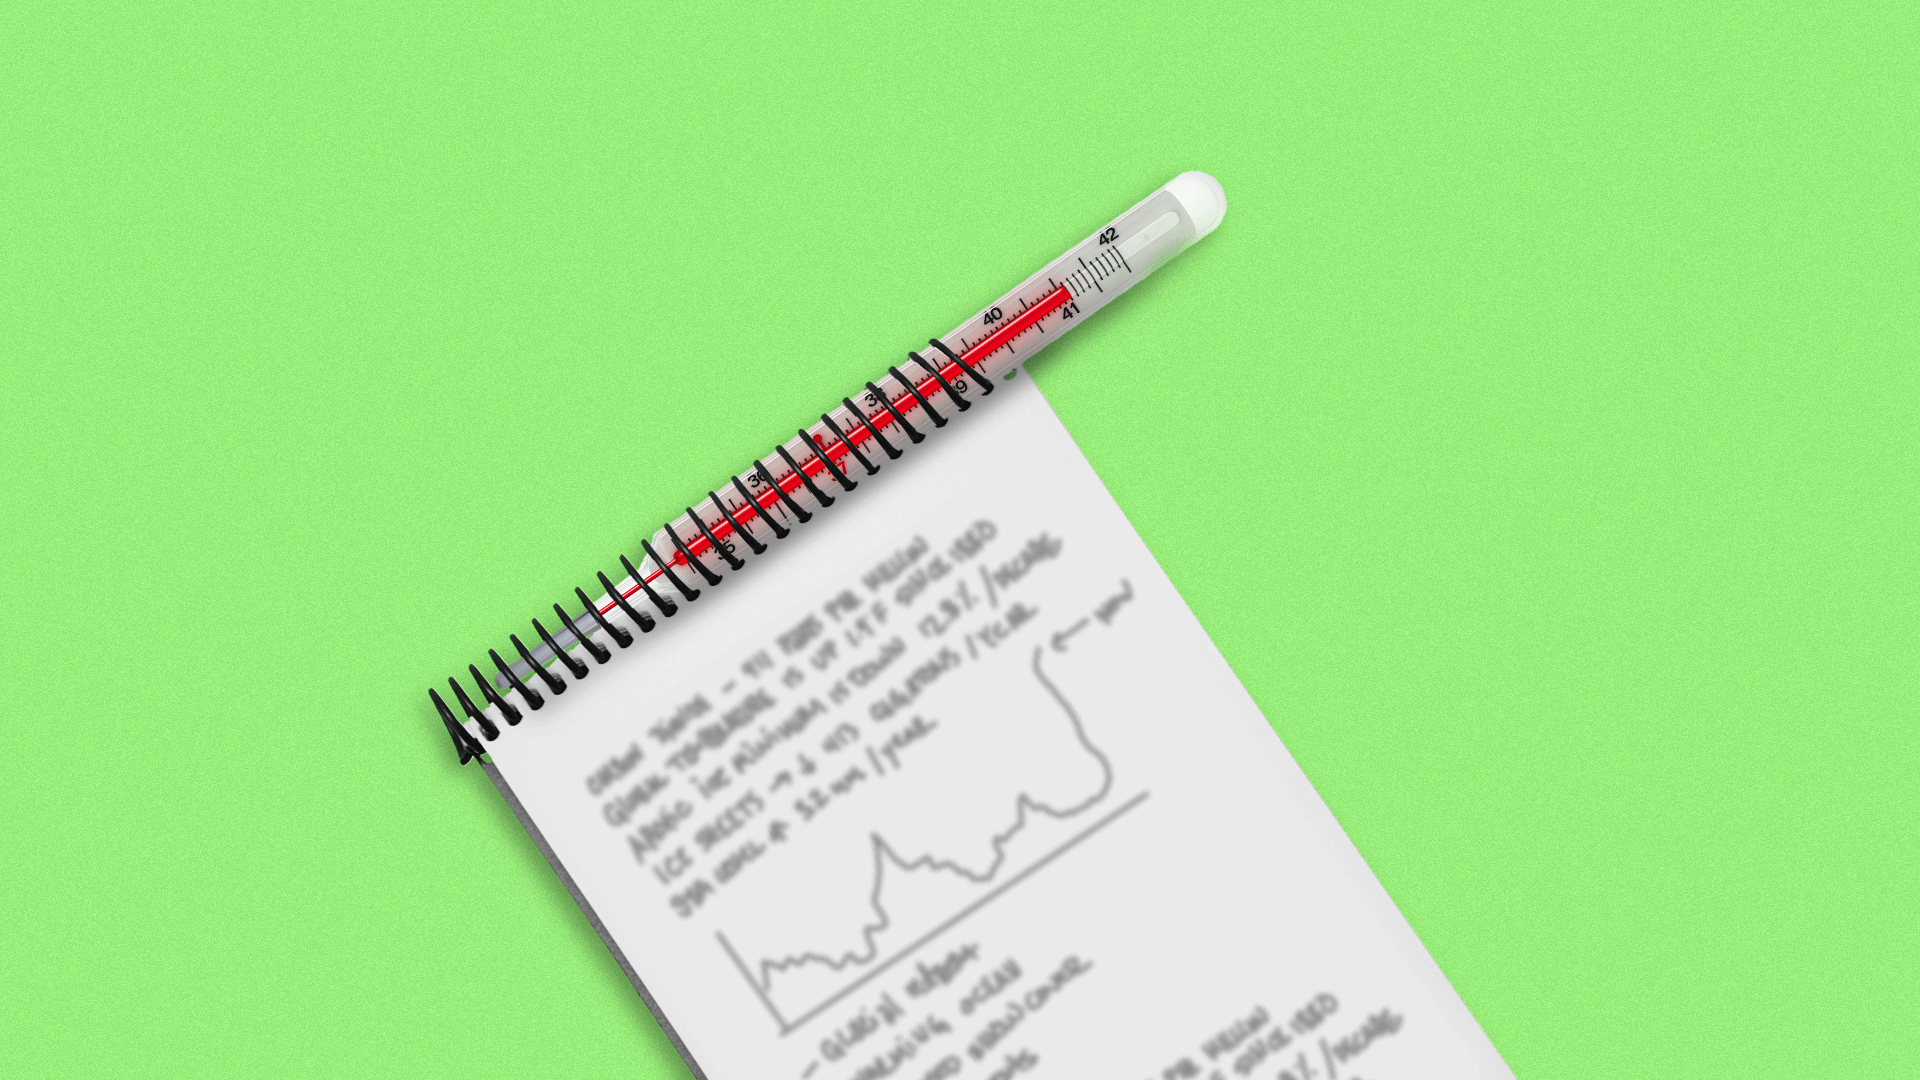 Illustration of a reporter's notebook with a thermometer in the spiral